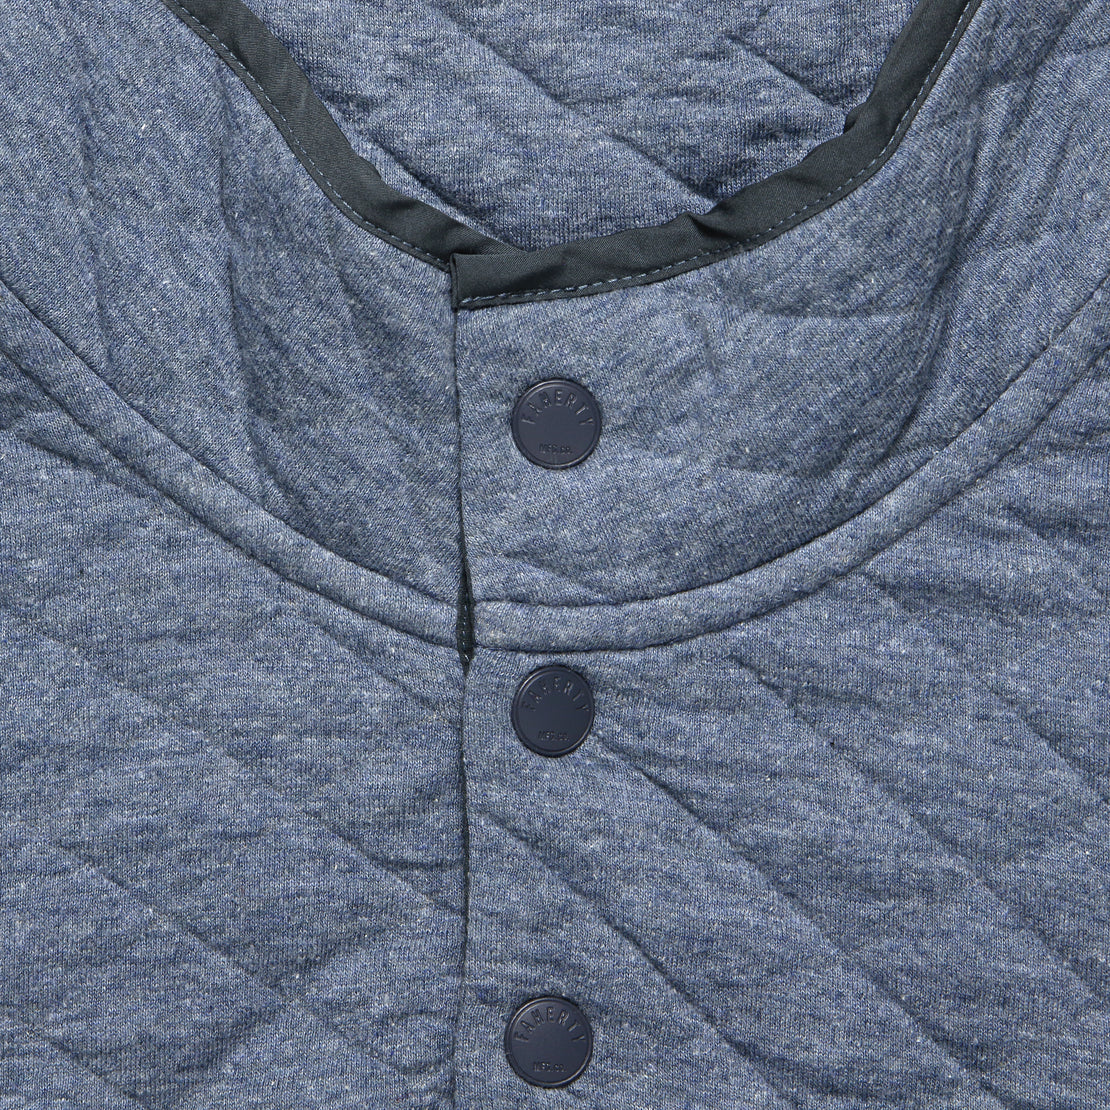 Epic Quilted Fleece Pullover - Faded Blue Heather - Faherty - STAG Provisions - Tops - Fleece / Sweatshirt